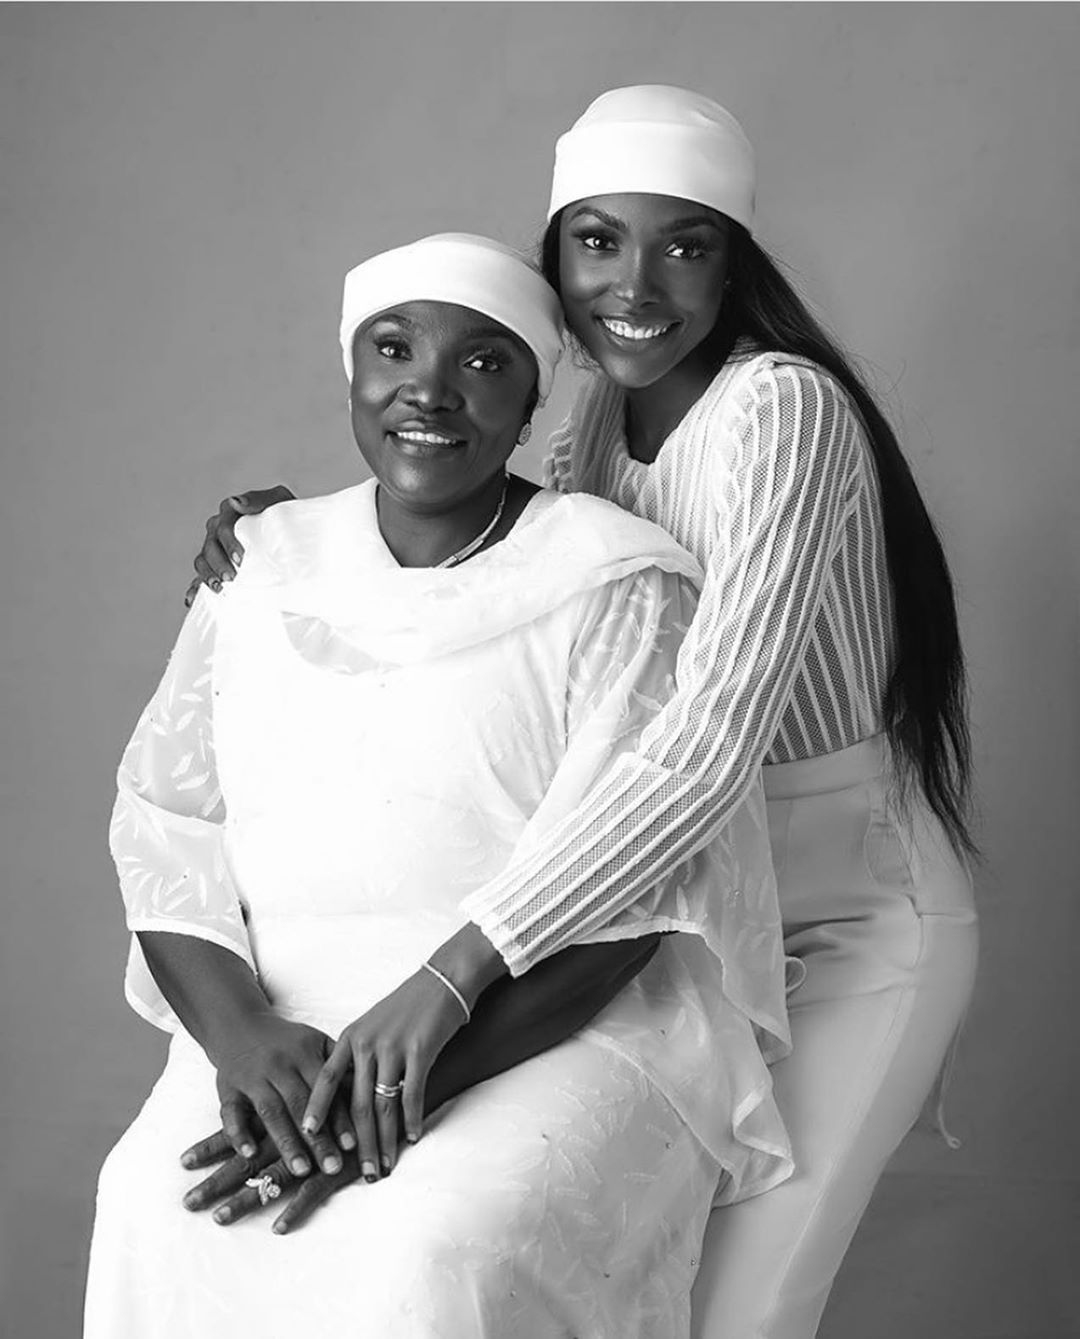 Nanfe twinning in white with her mother